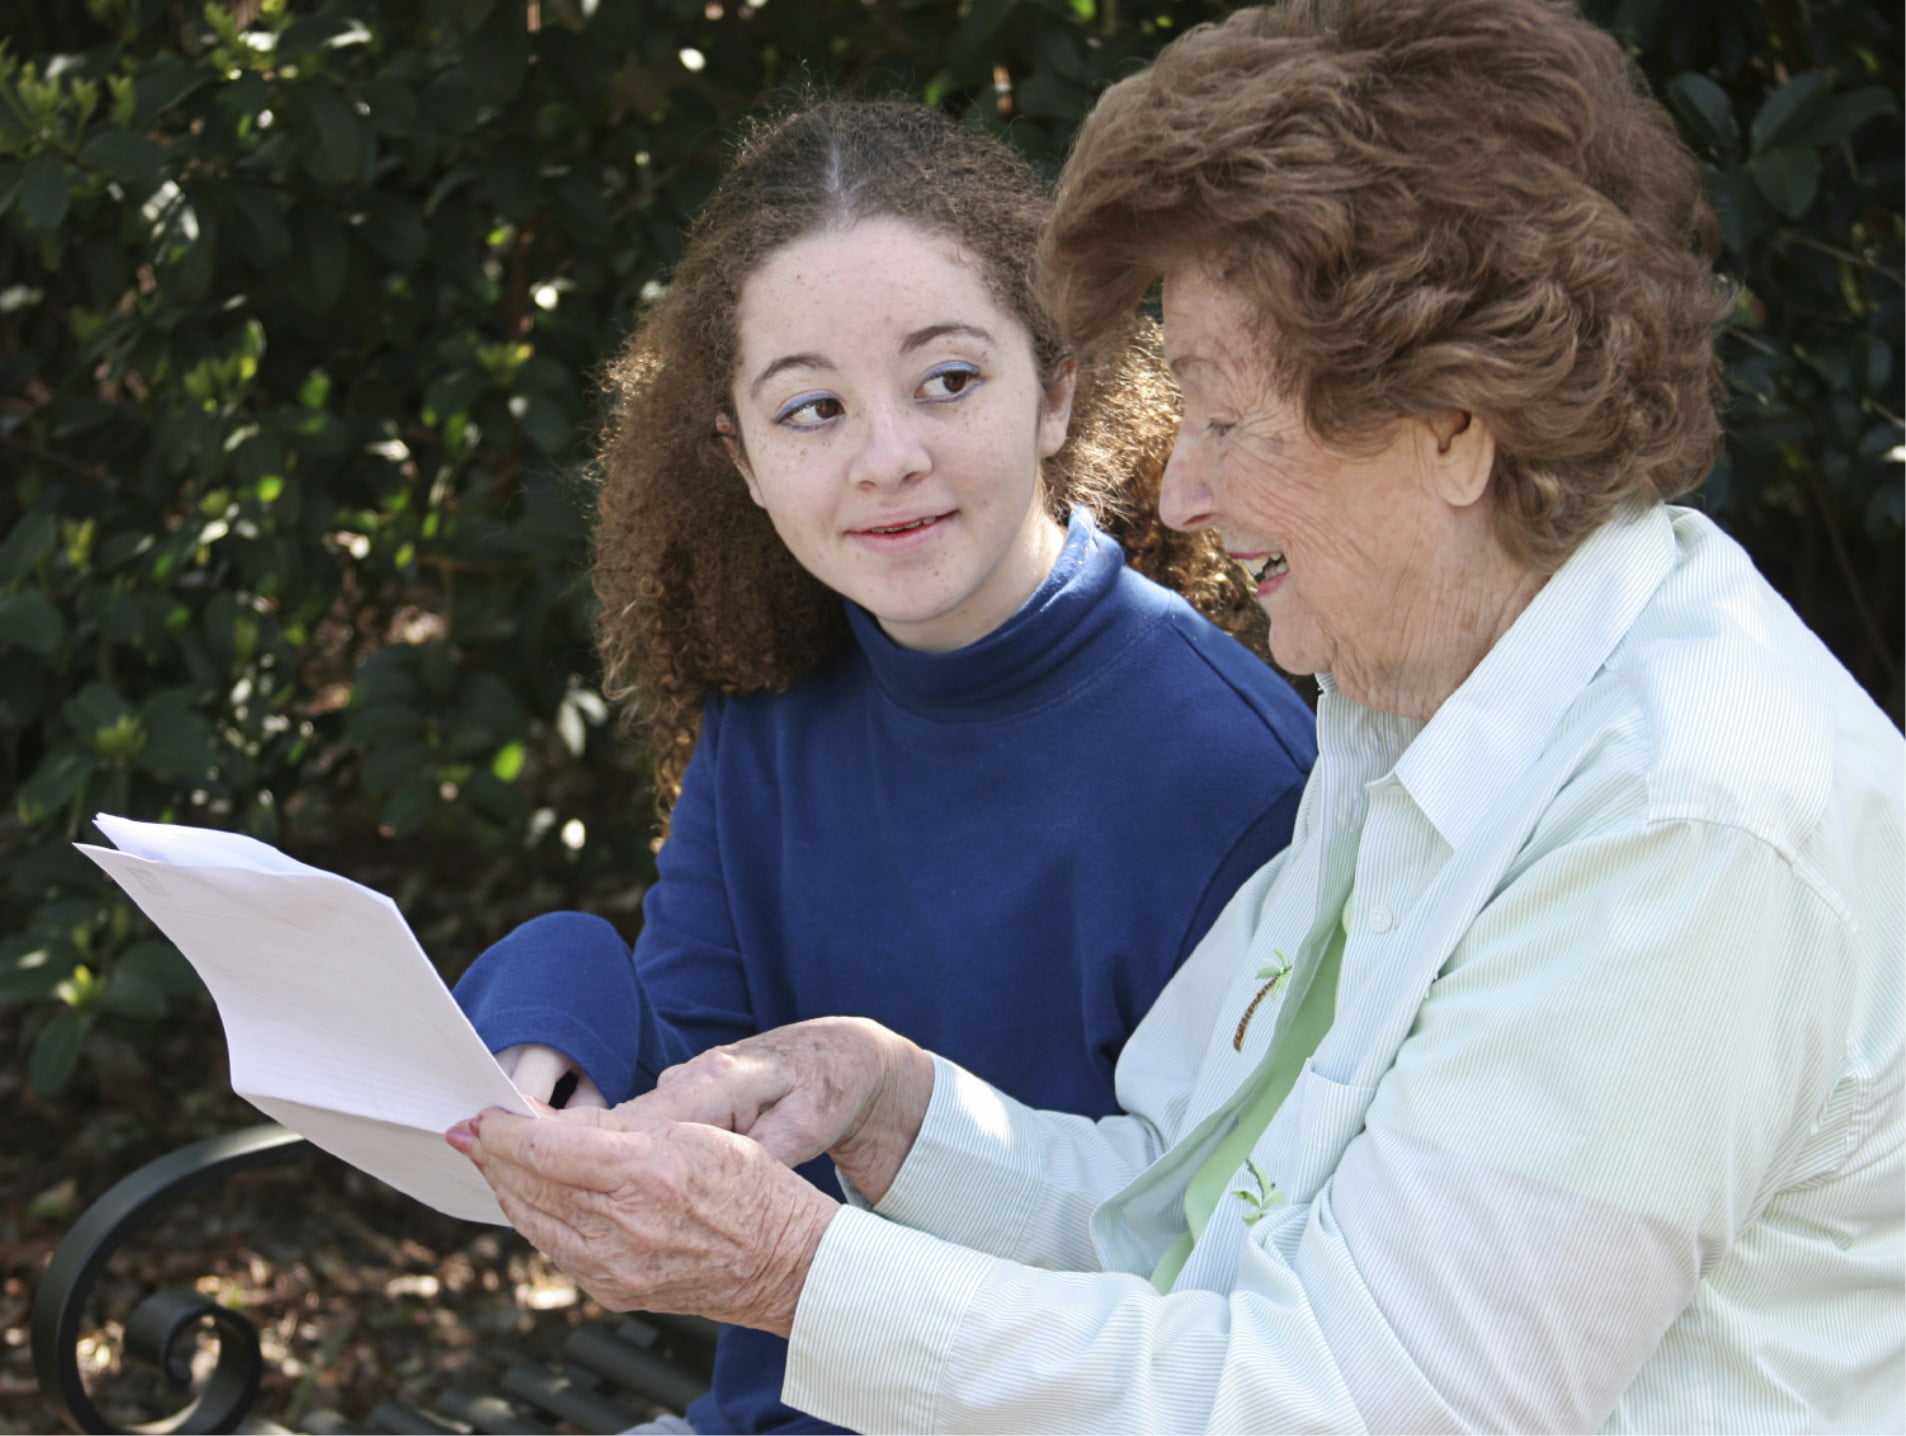 Older and younger women reading a document near hedge